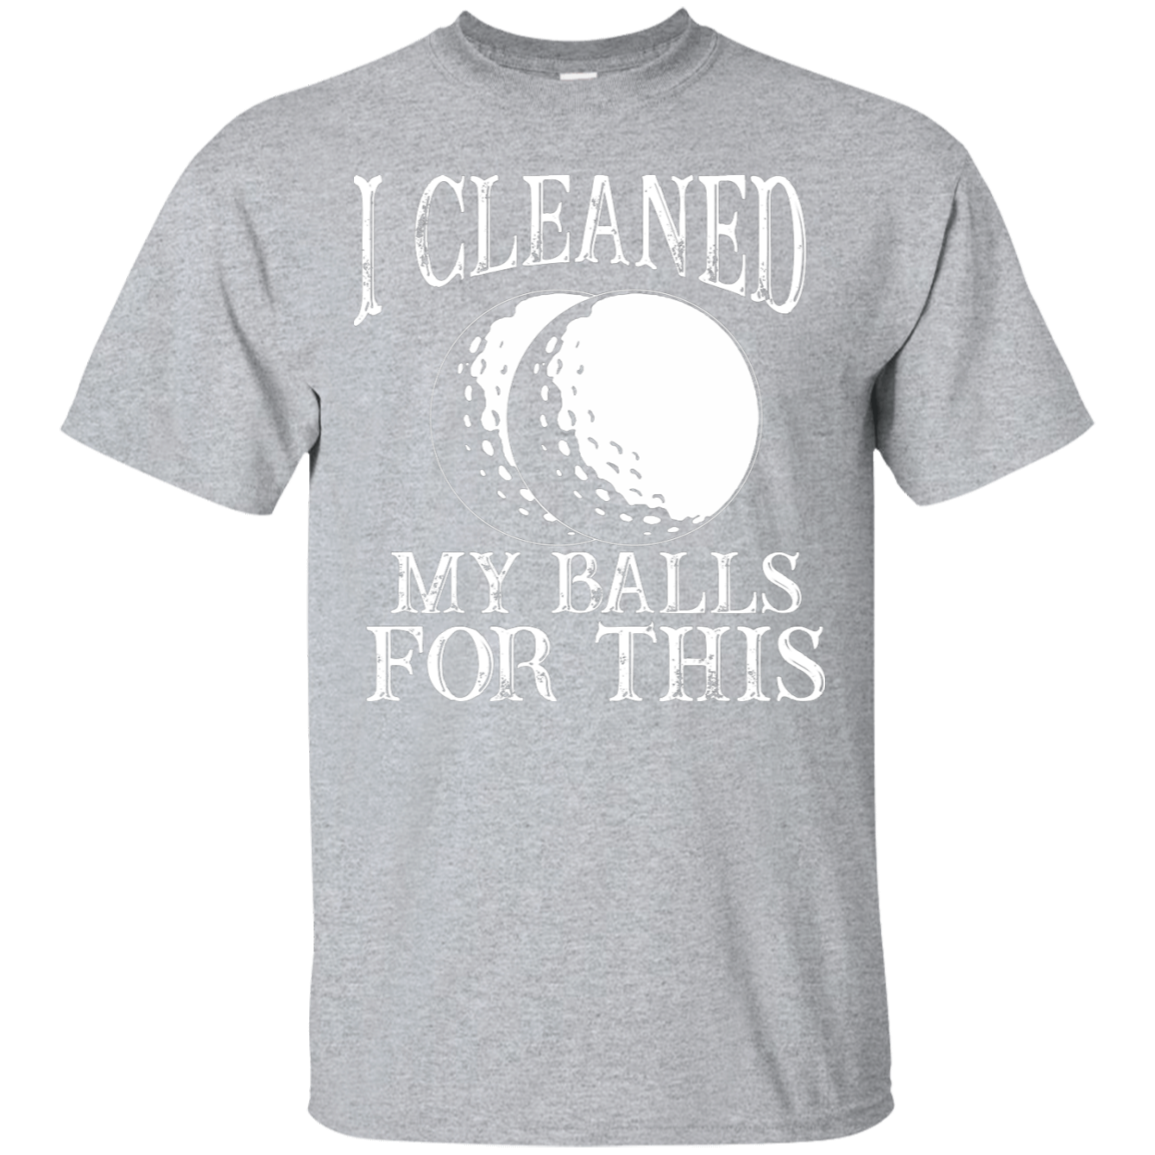 I Cleaned My Balls For This T-Shirt Apparel - The Beer Lodge